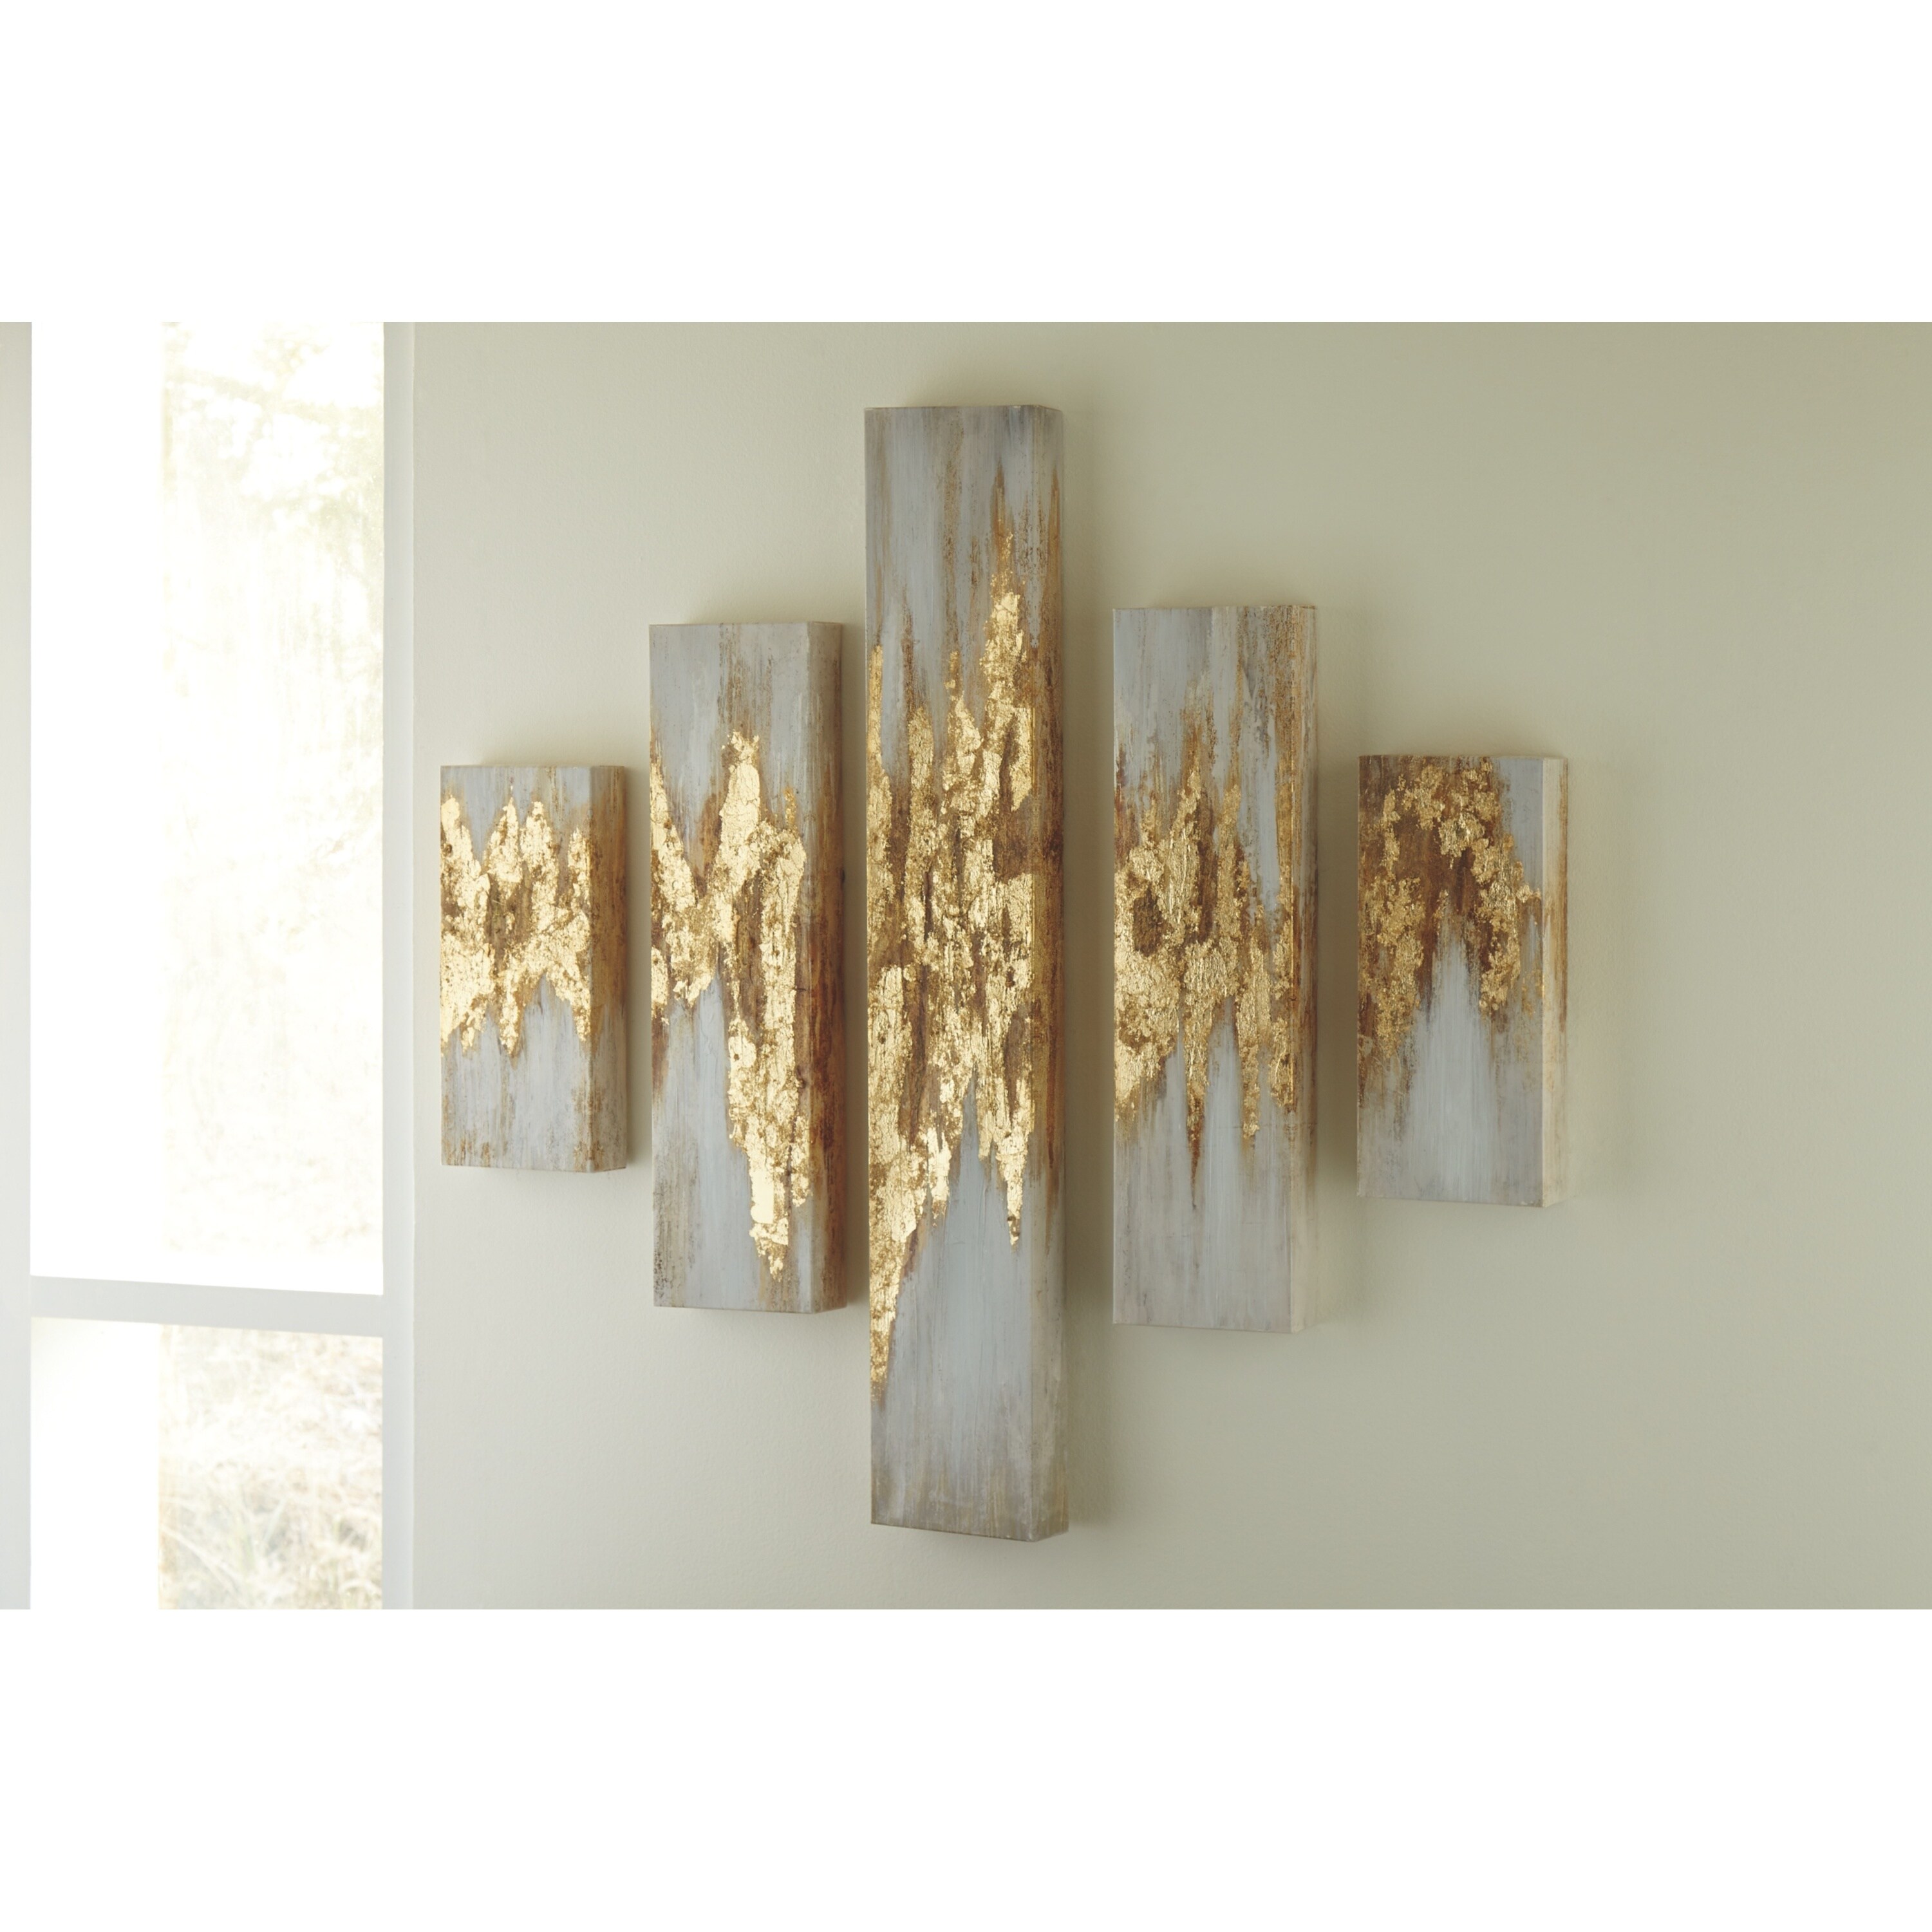 Shop Devlan Contemporary Glam Wall Art Set Of 5 On Sale Overstock 20908984